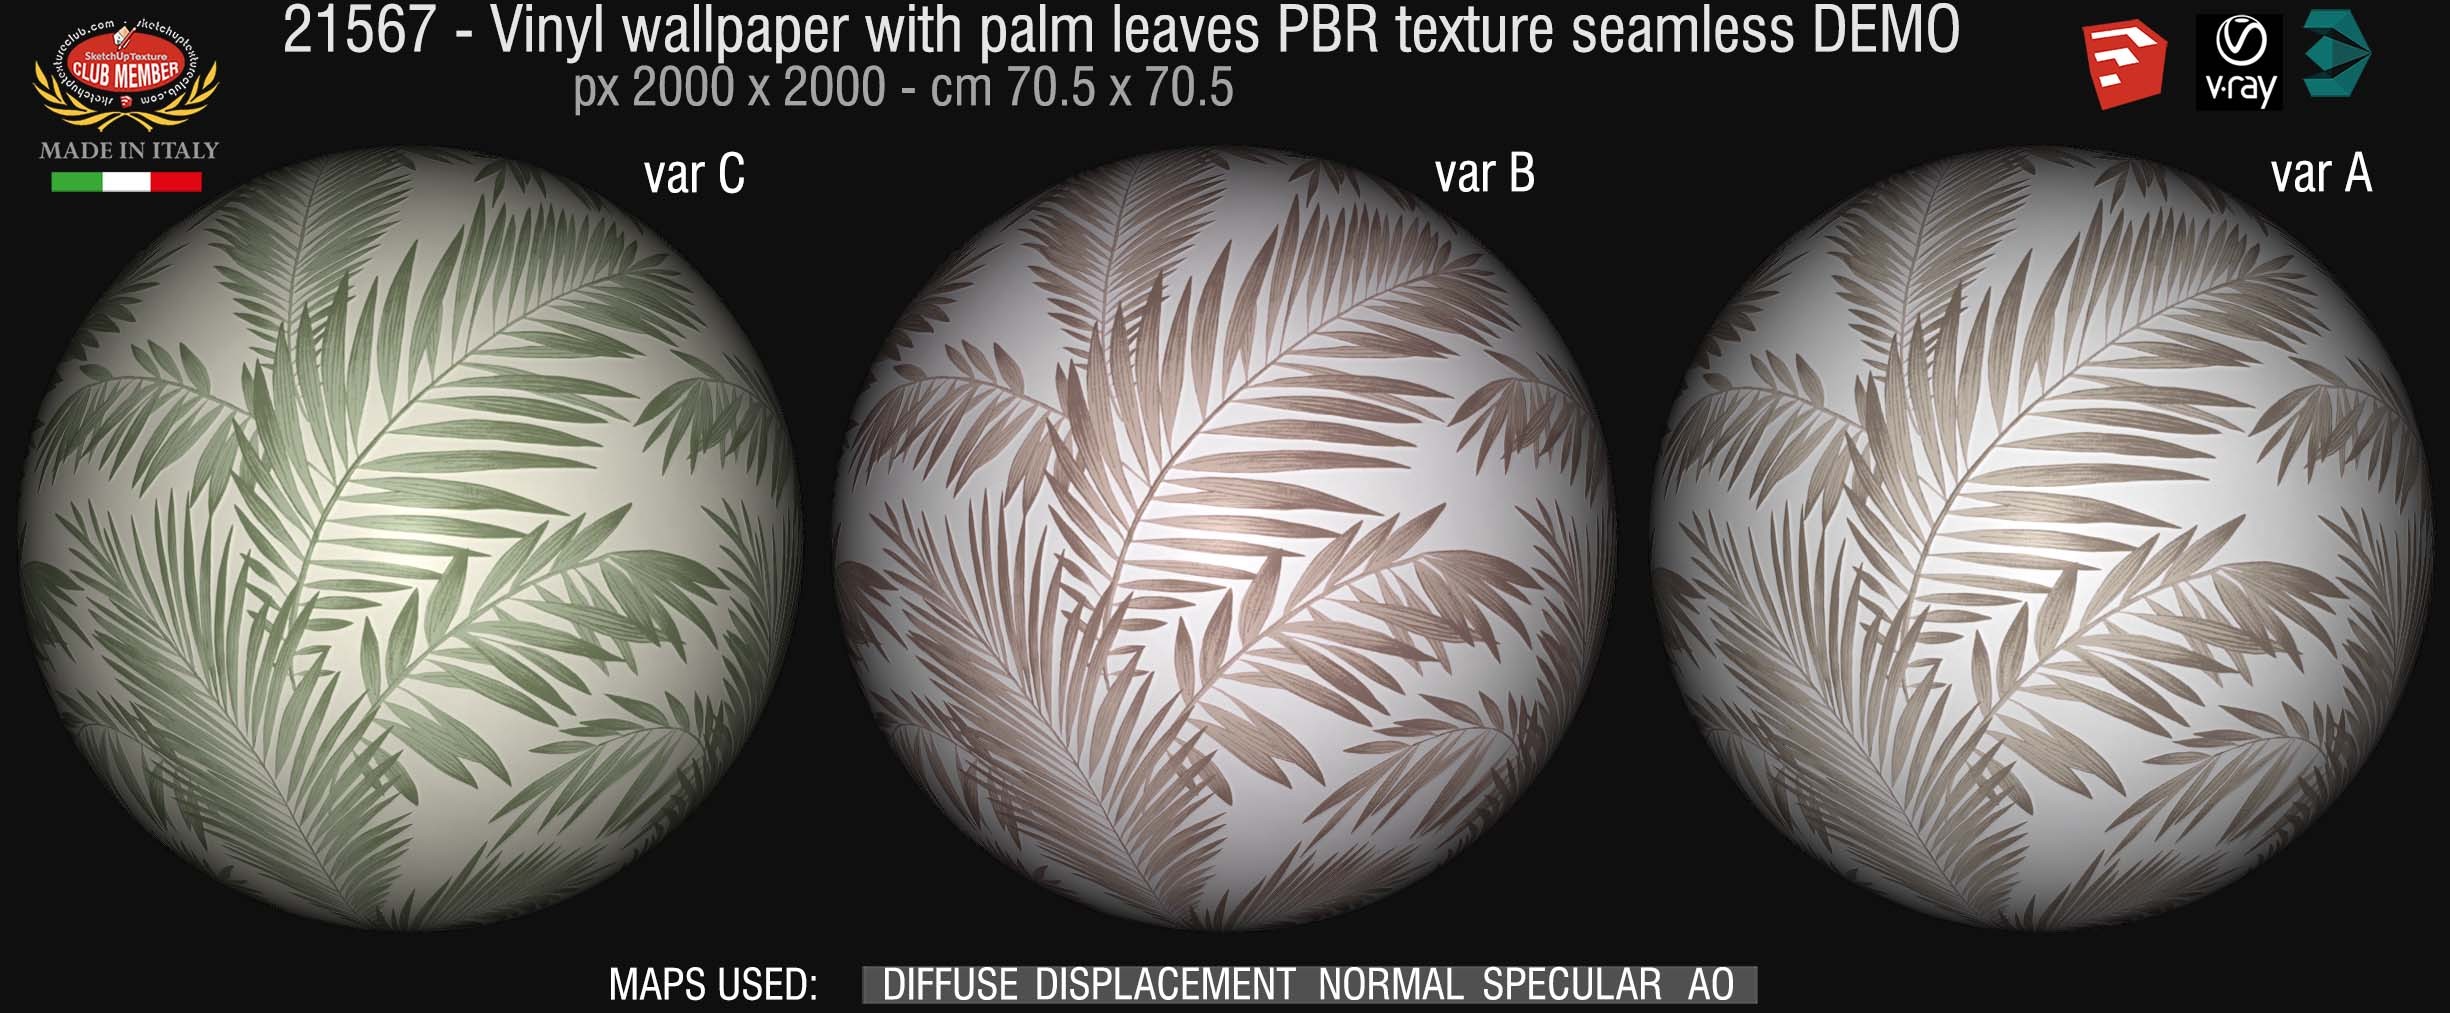 21567 Vinyl wallpaper with palm leaves PBR texture seamless DEMO